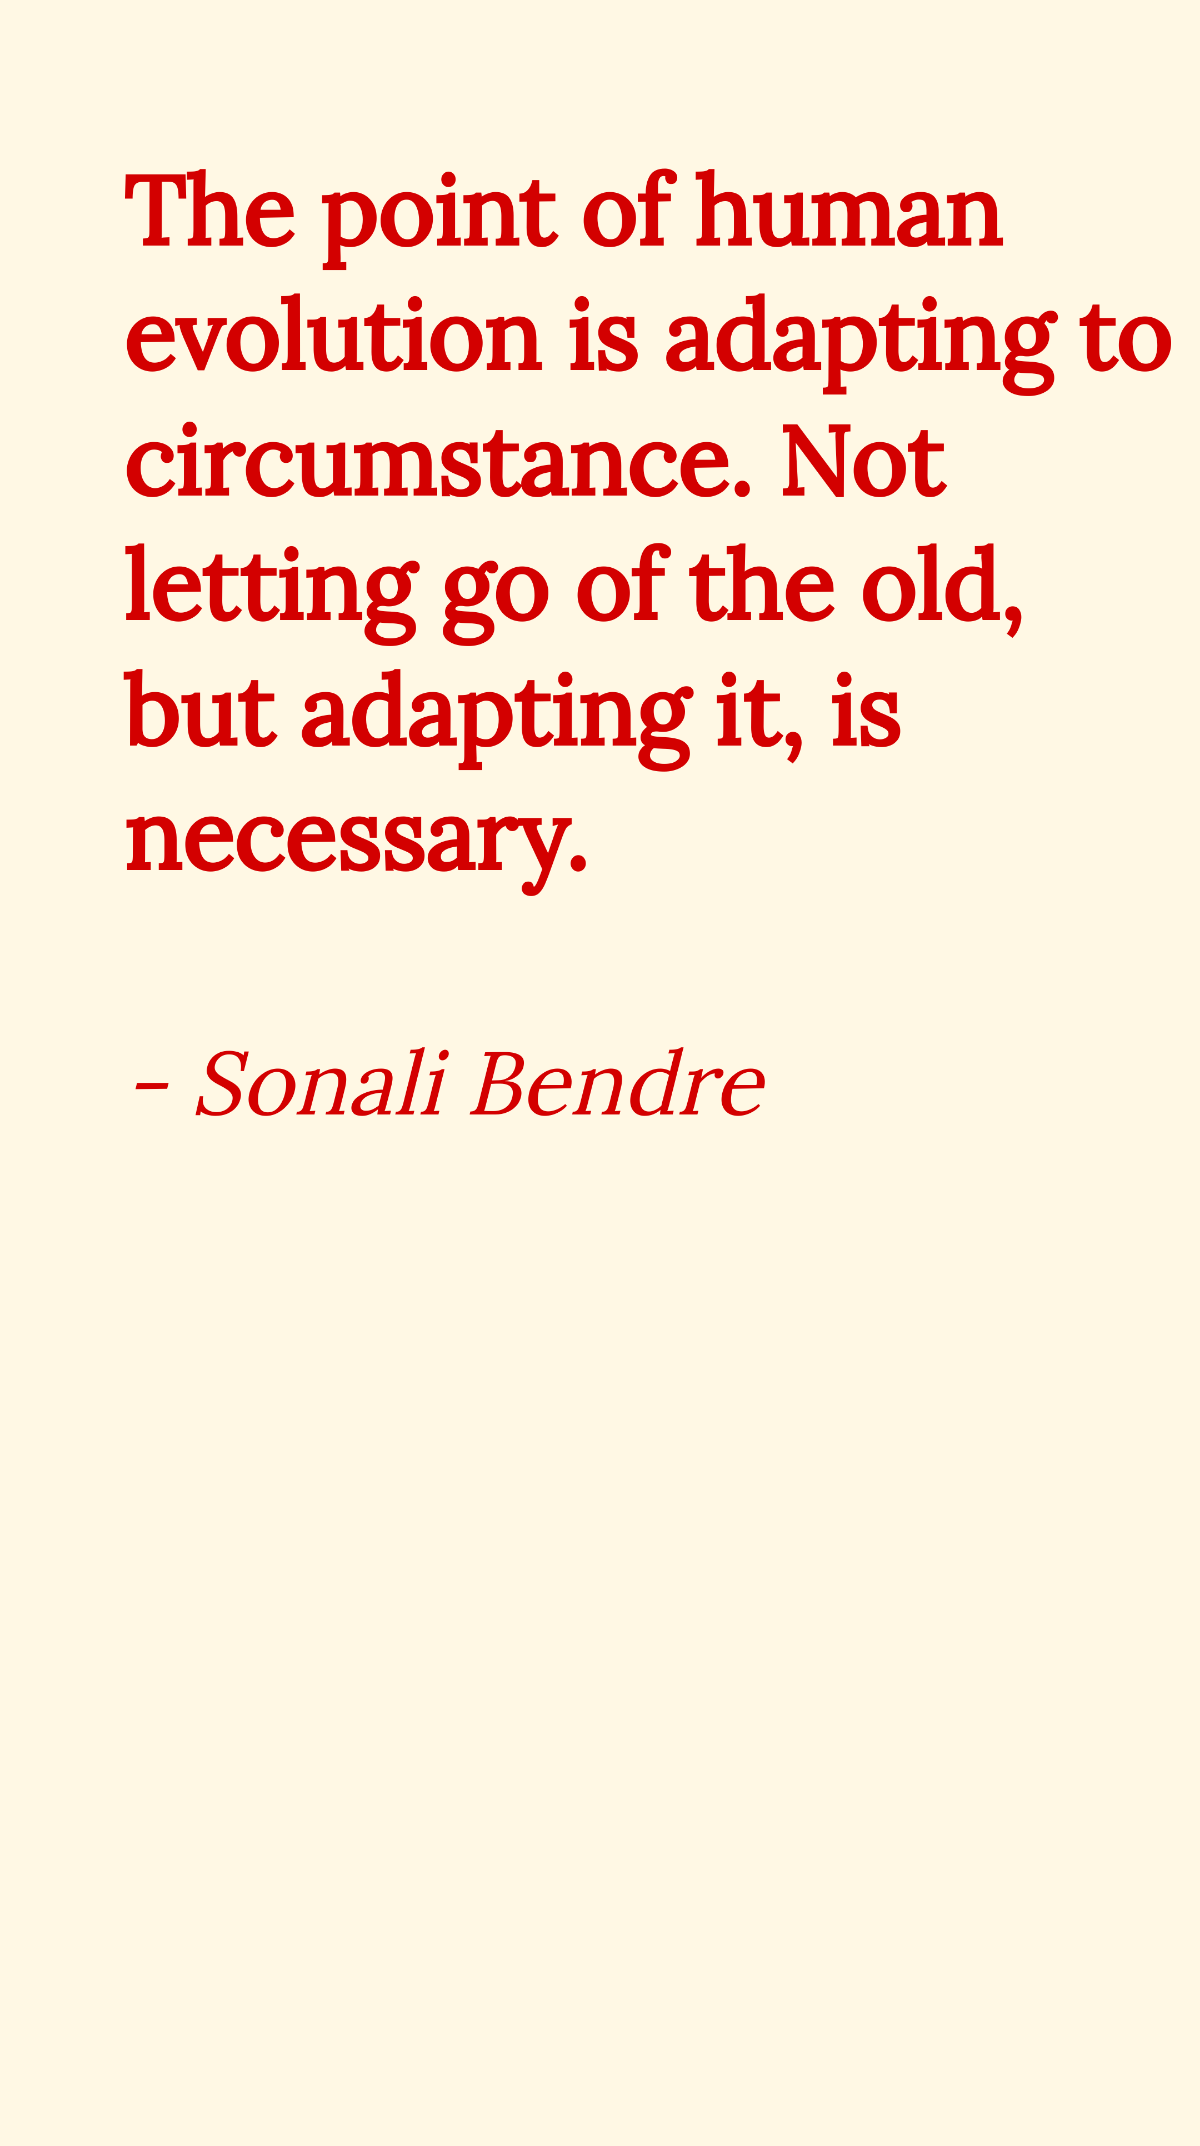 Free Sonali Bendre - The point of human evolution is adapting to circumstance. Not letting go of the old, but adapting it, is necessary. Template